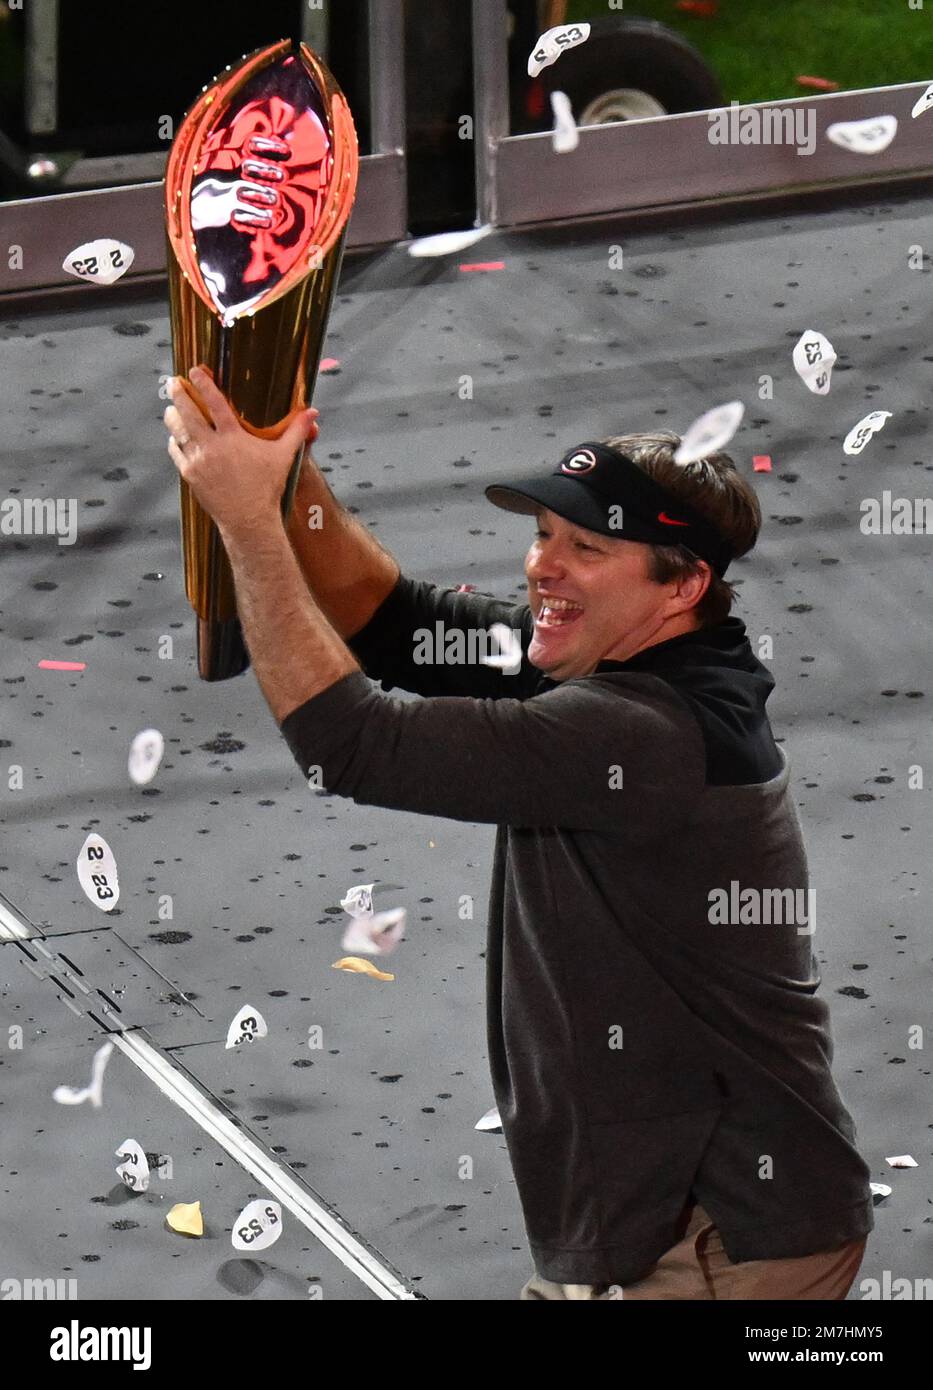 Inglewood, United States. 09th Jan, 2023. Georgia head coach Kirby Smart raises the National College Football Championship Trophy after the Bulldogs defeated the TCU Horned Frogs 65-7 in the 2023 NCAA College Football National Championship at SoFi Stadium in Inglewood, California, on Monday, January 9, 2023. Photo by Jon SooHoo/UPI Credit: UPI/Alamy Live News Stock Photo